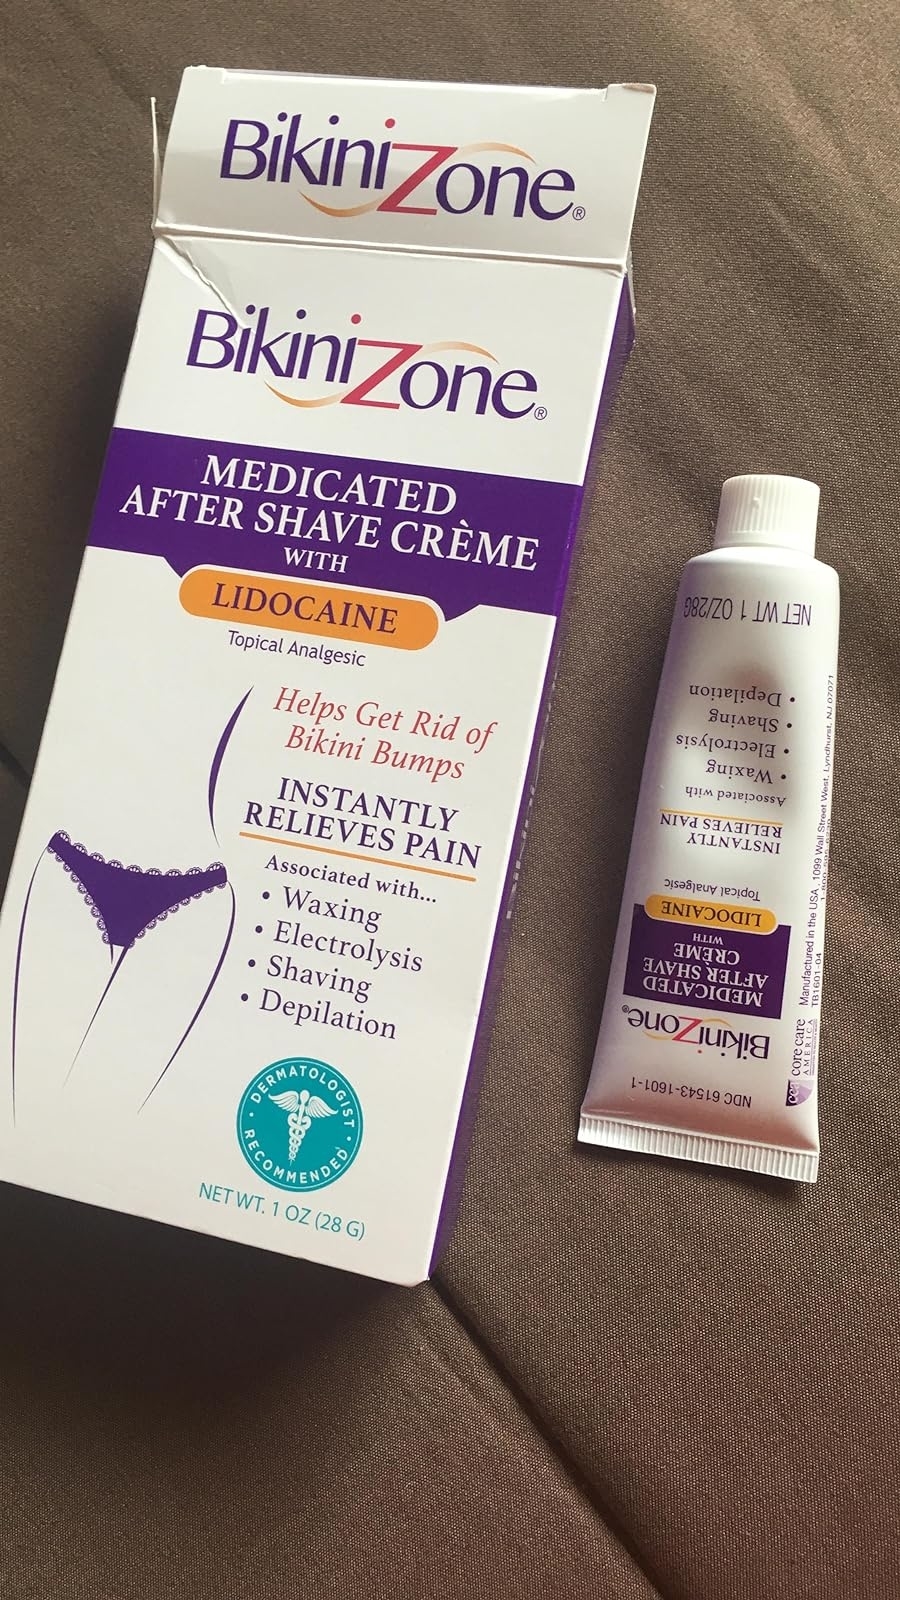 Reviewer&#x27;s photo of Bikini Zone cream and packaging with details on relief from shaving irritation